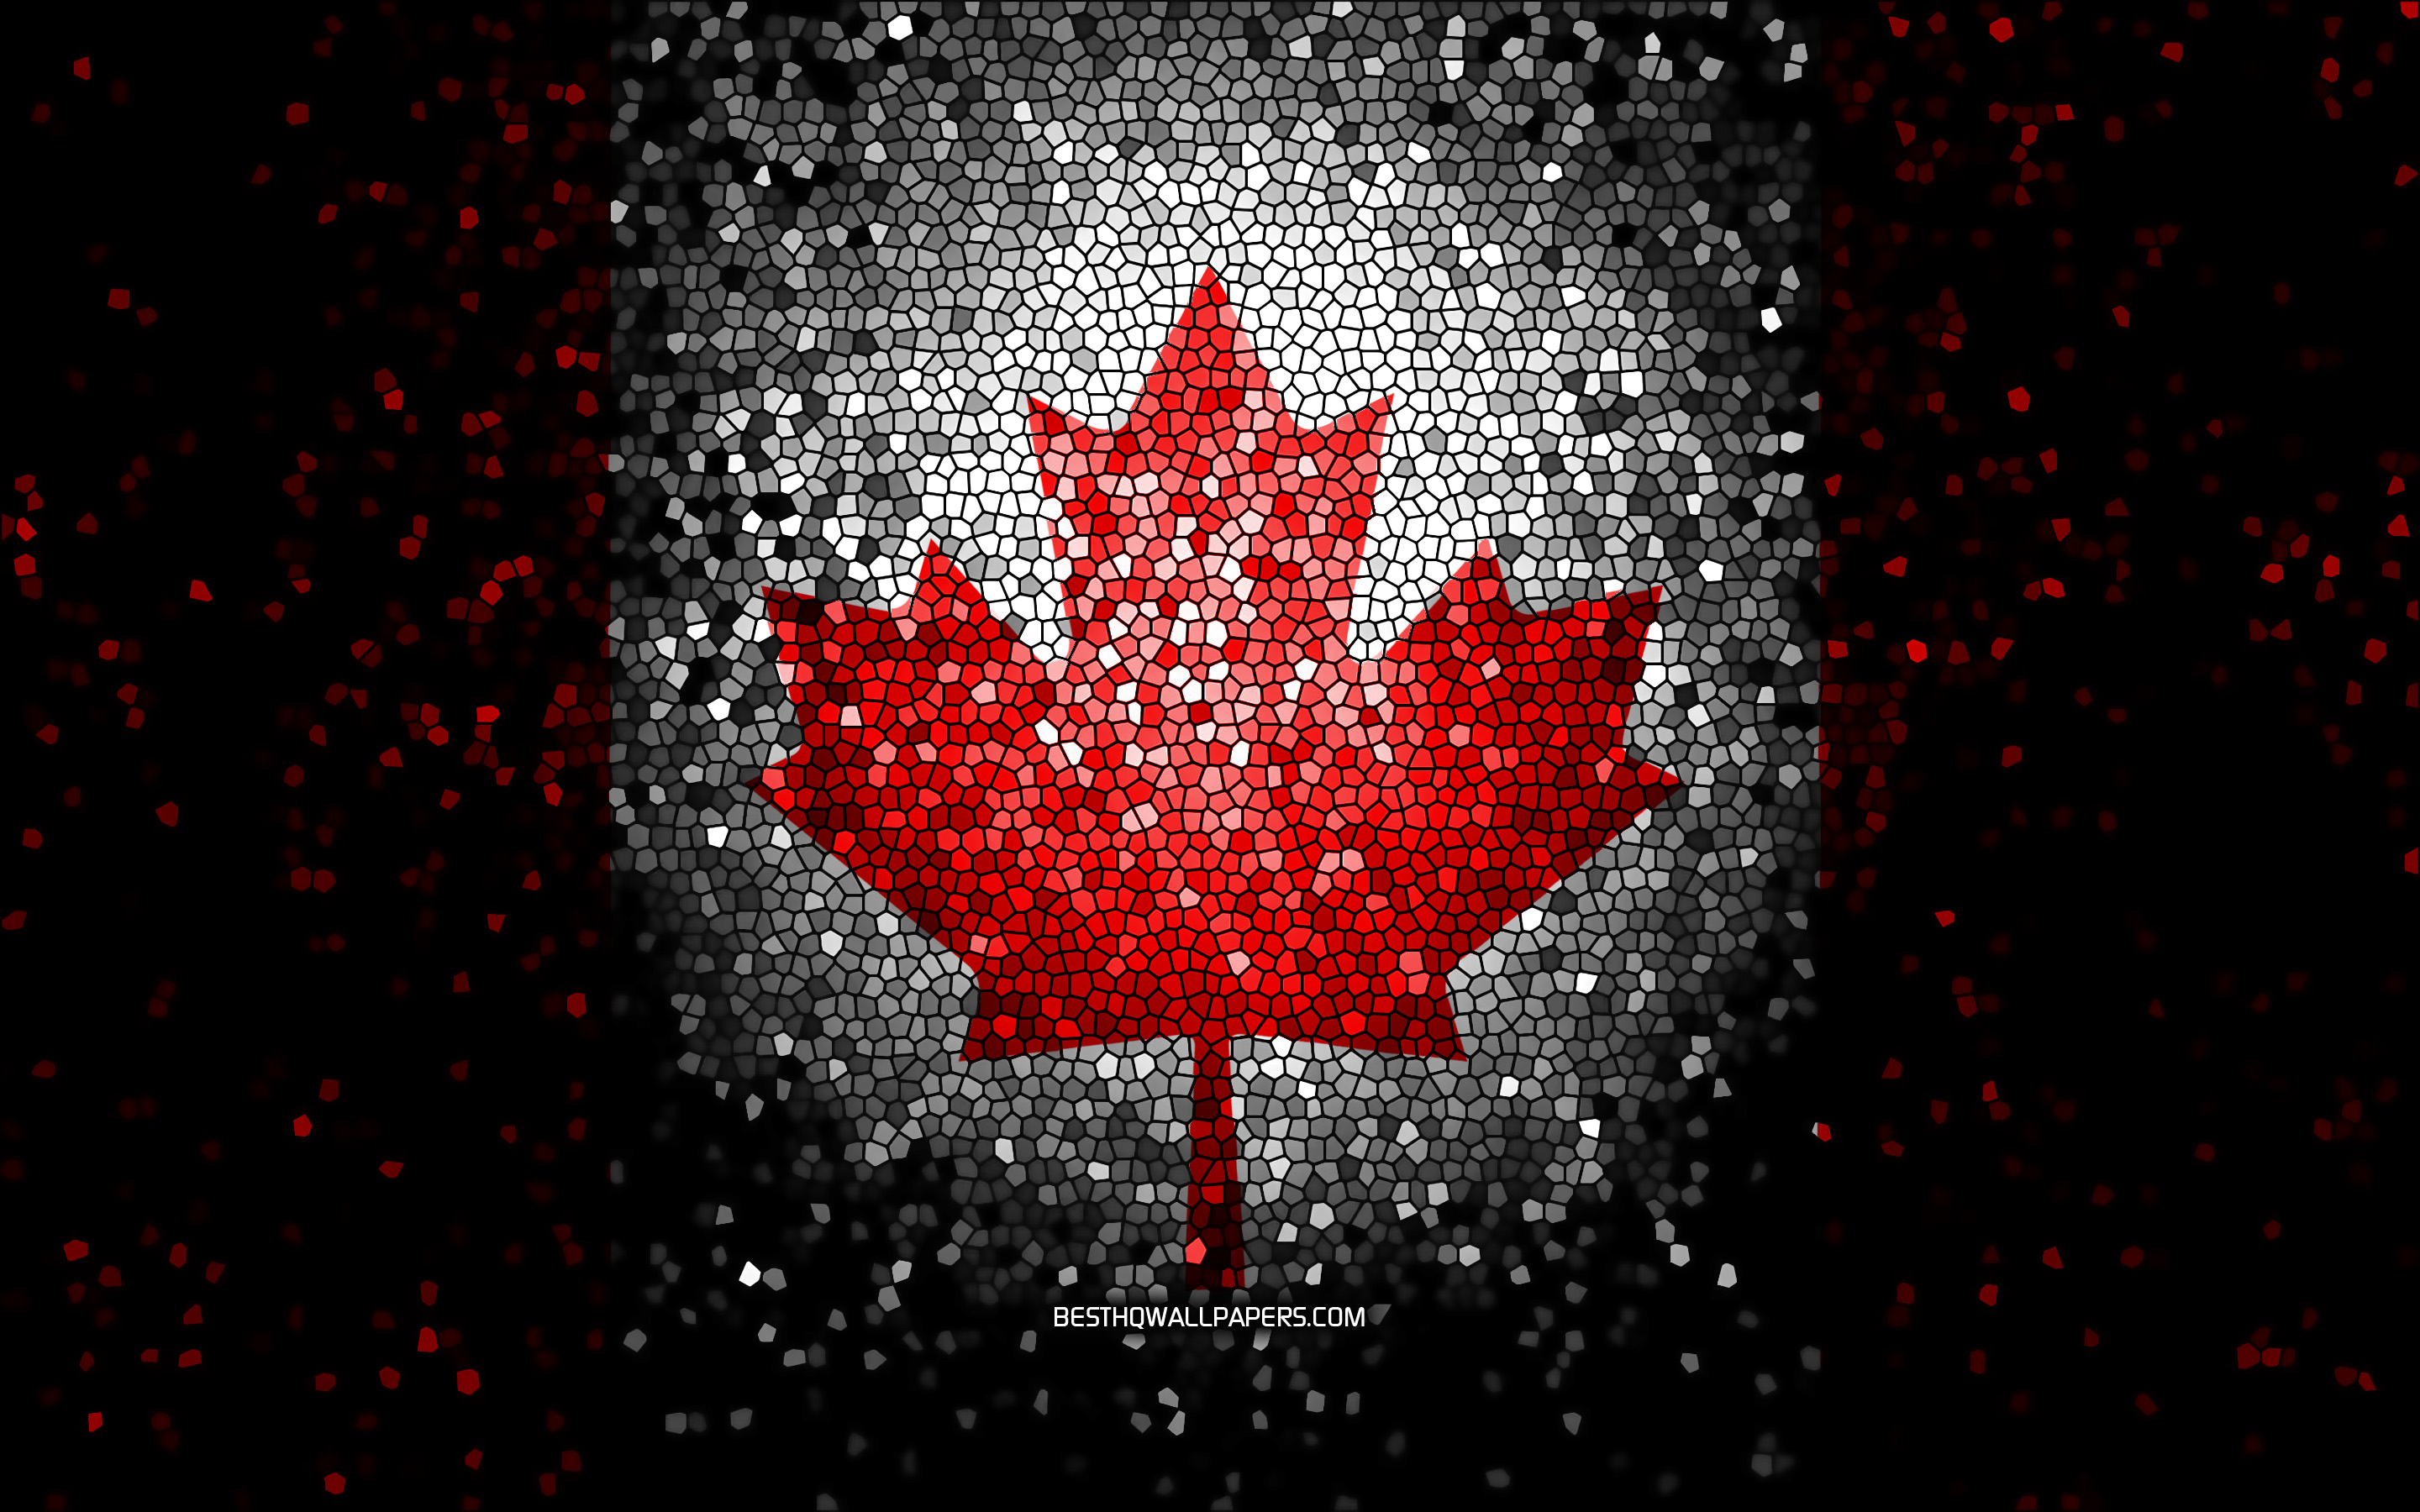 Download wallpaper Canada flag, mosaic art, North American countries, Flag of Canada, national symbols, Canadian flag, artwork, North America, Canada for desktop with resolution 2880x1800. High Quality HD picture wallpaper